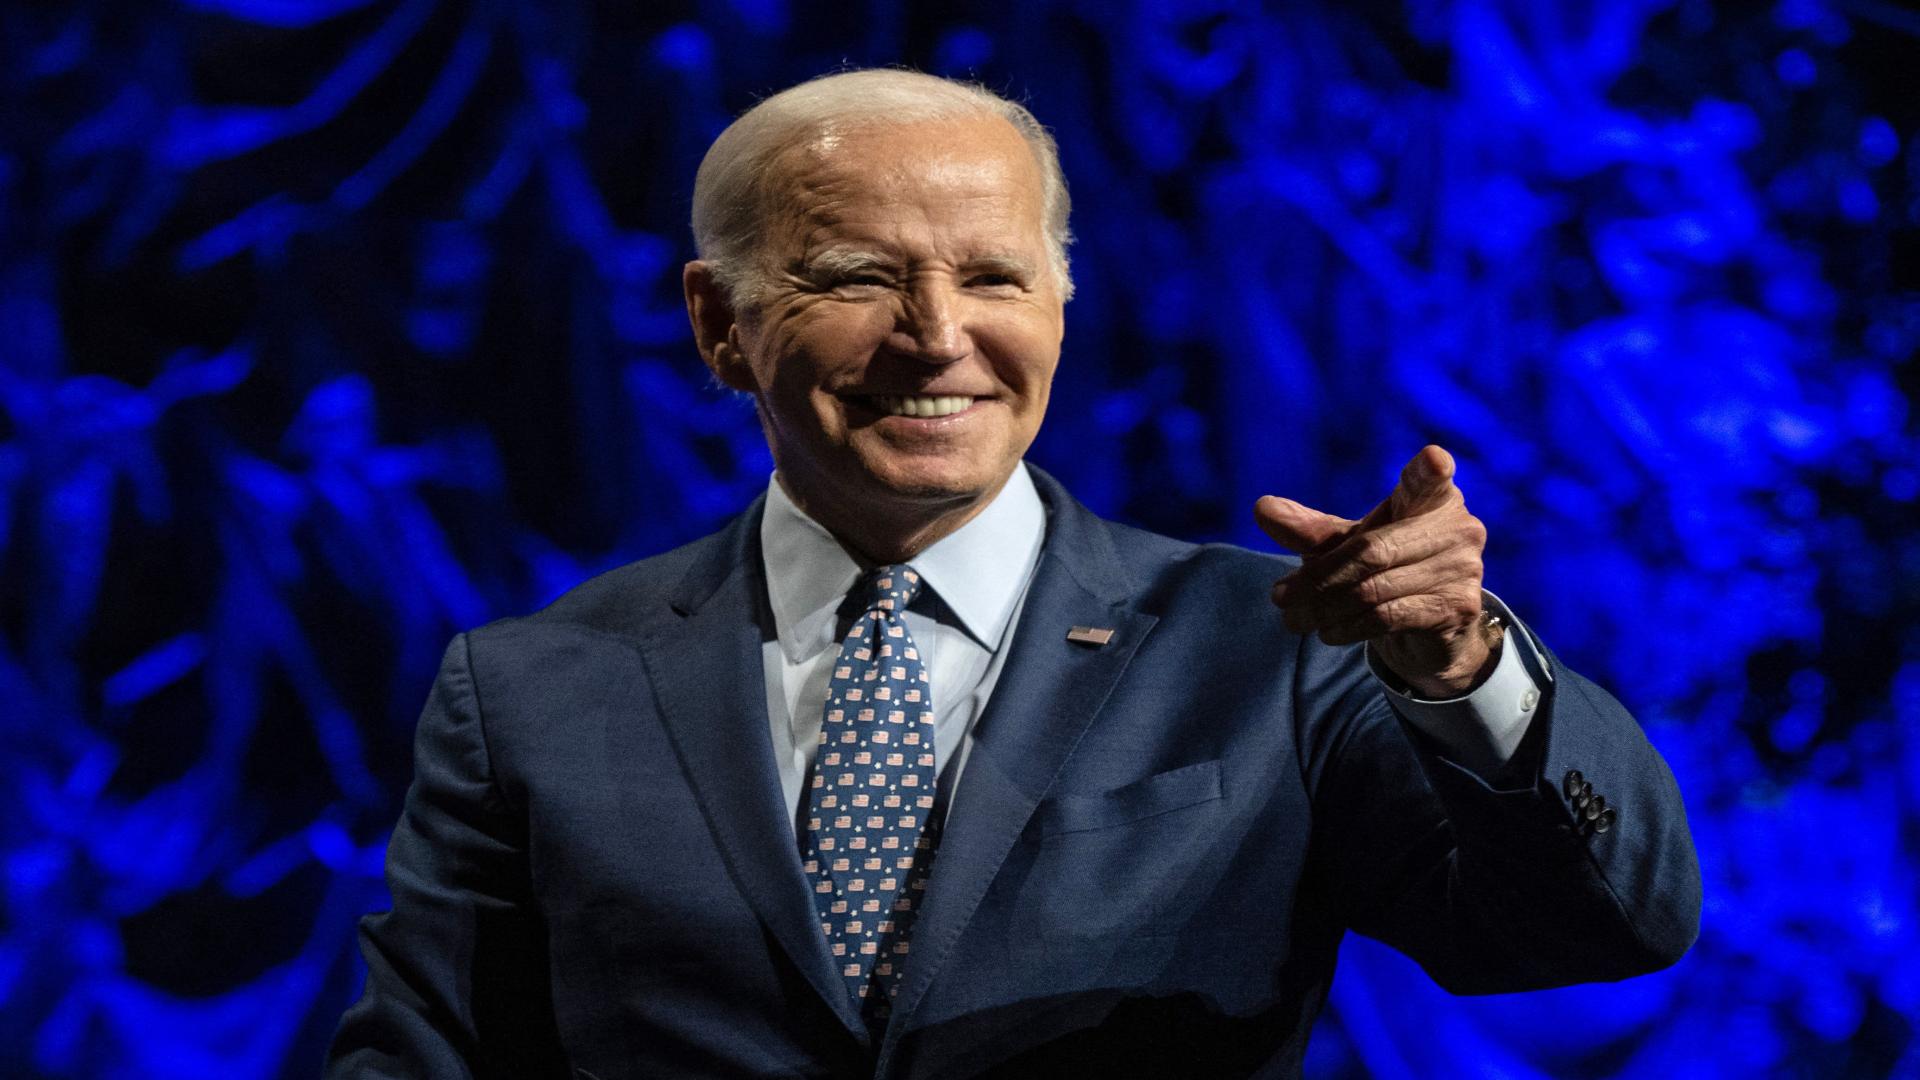 Biden to meet with A.I. experts in San Francisco